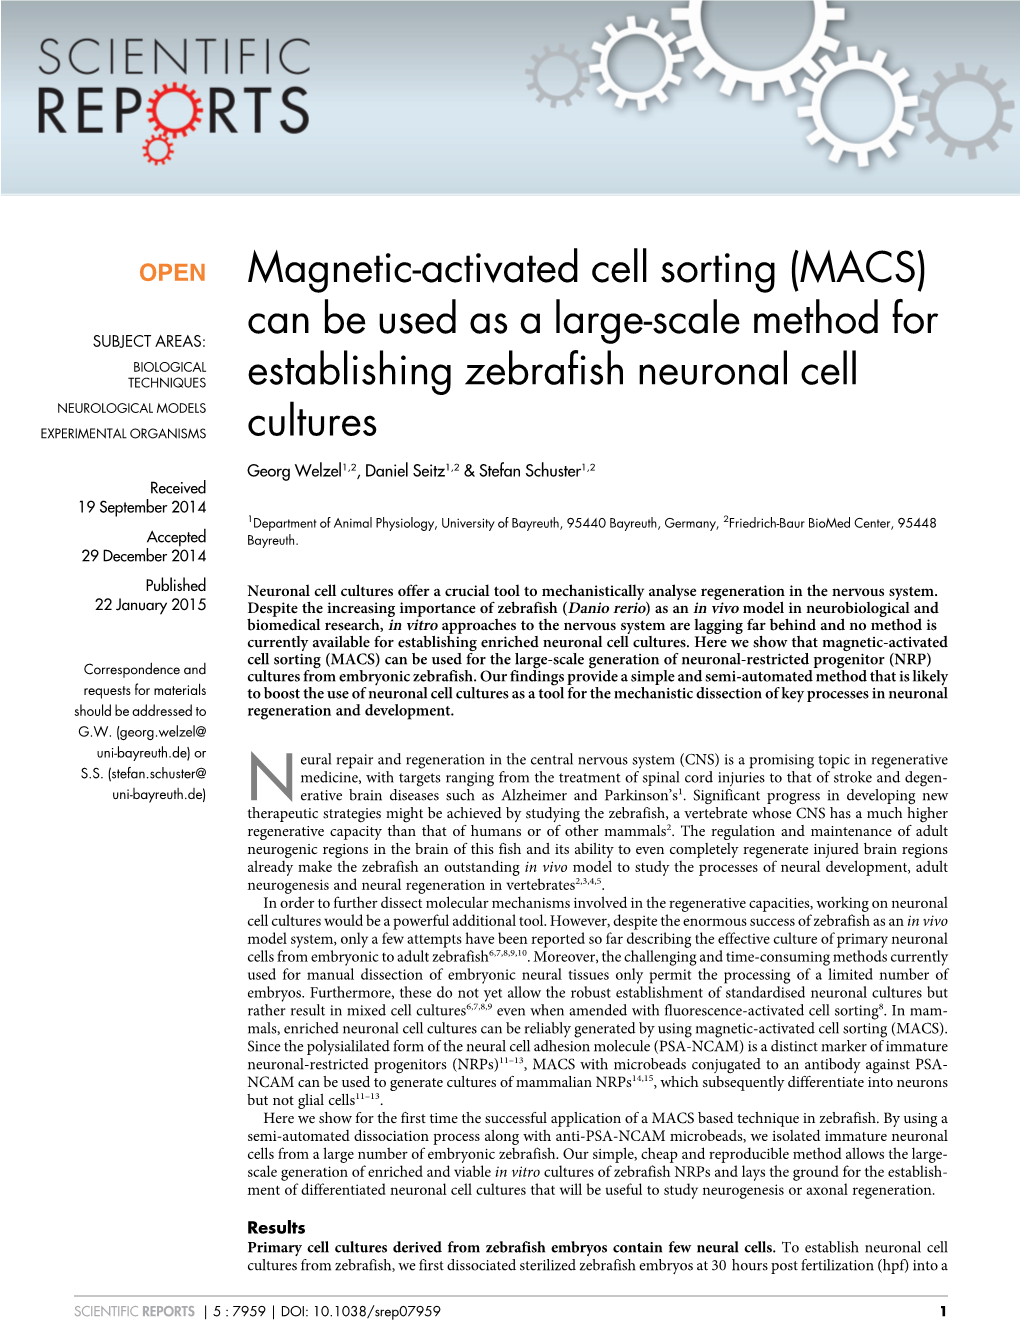 Can Be Used As a Large-Scale Method for Establishing Zebrafish Neuronal Cell Restricted Progenitor Cells After Heterotopic Transplantation